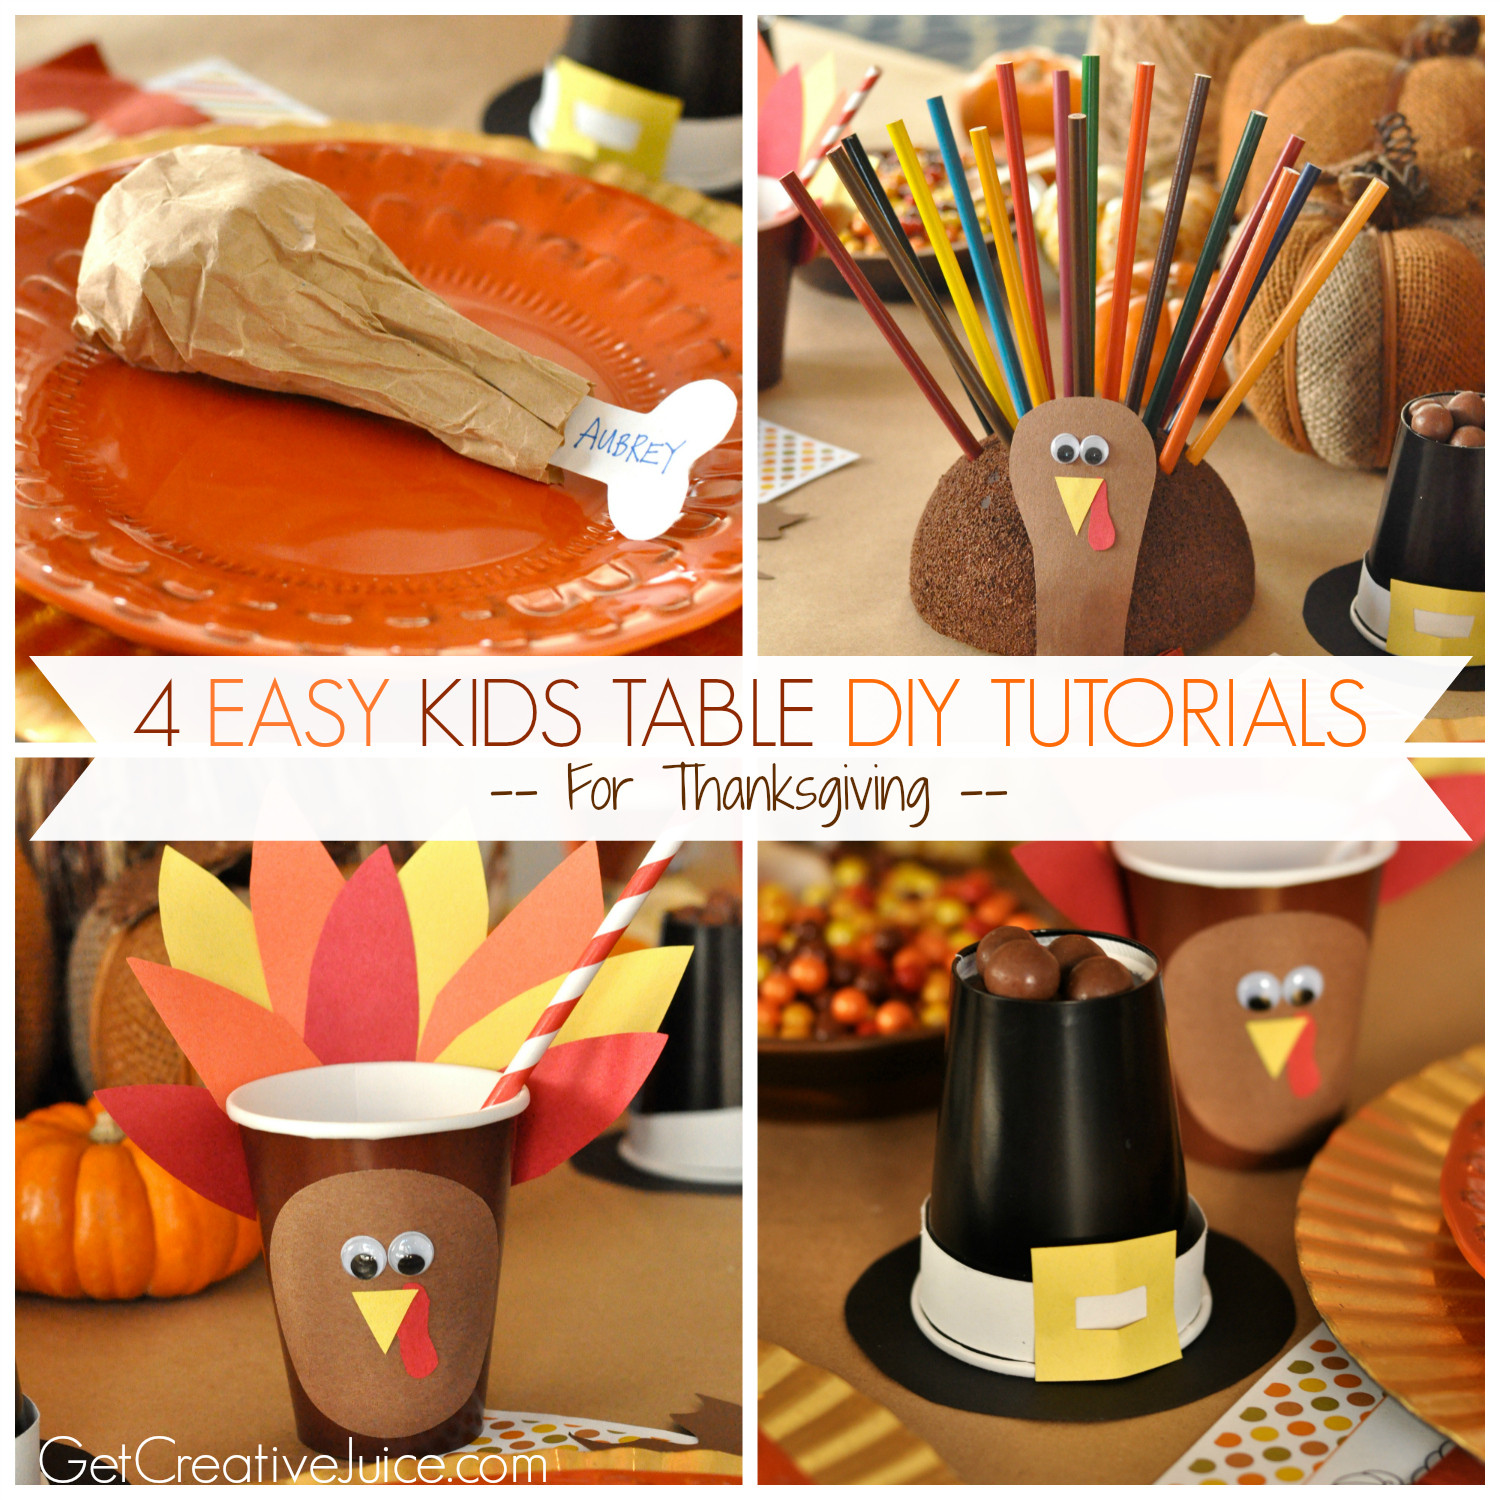 Easy Thanksgiving Table Decorations
 Easy DIY Kids Thanksgiving Table Ideas Creative Juice